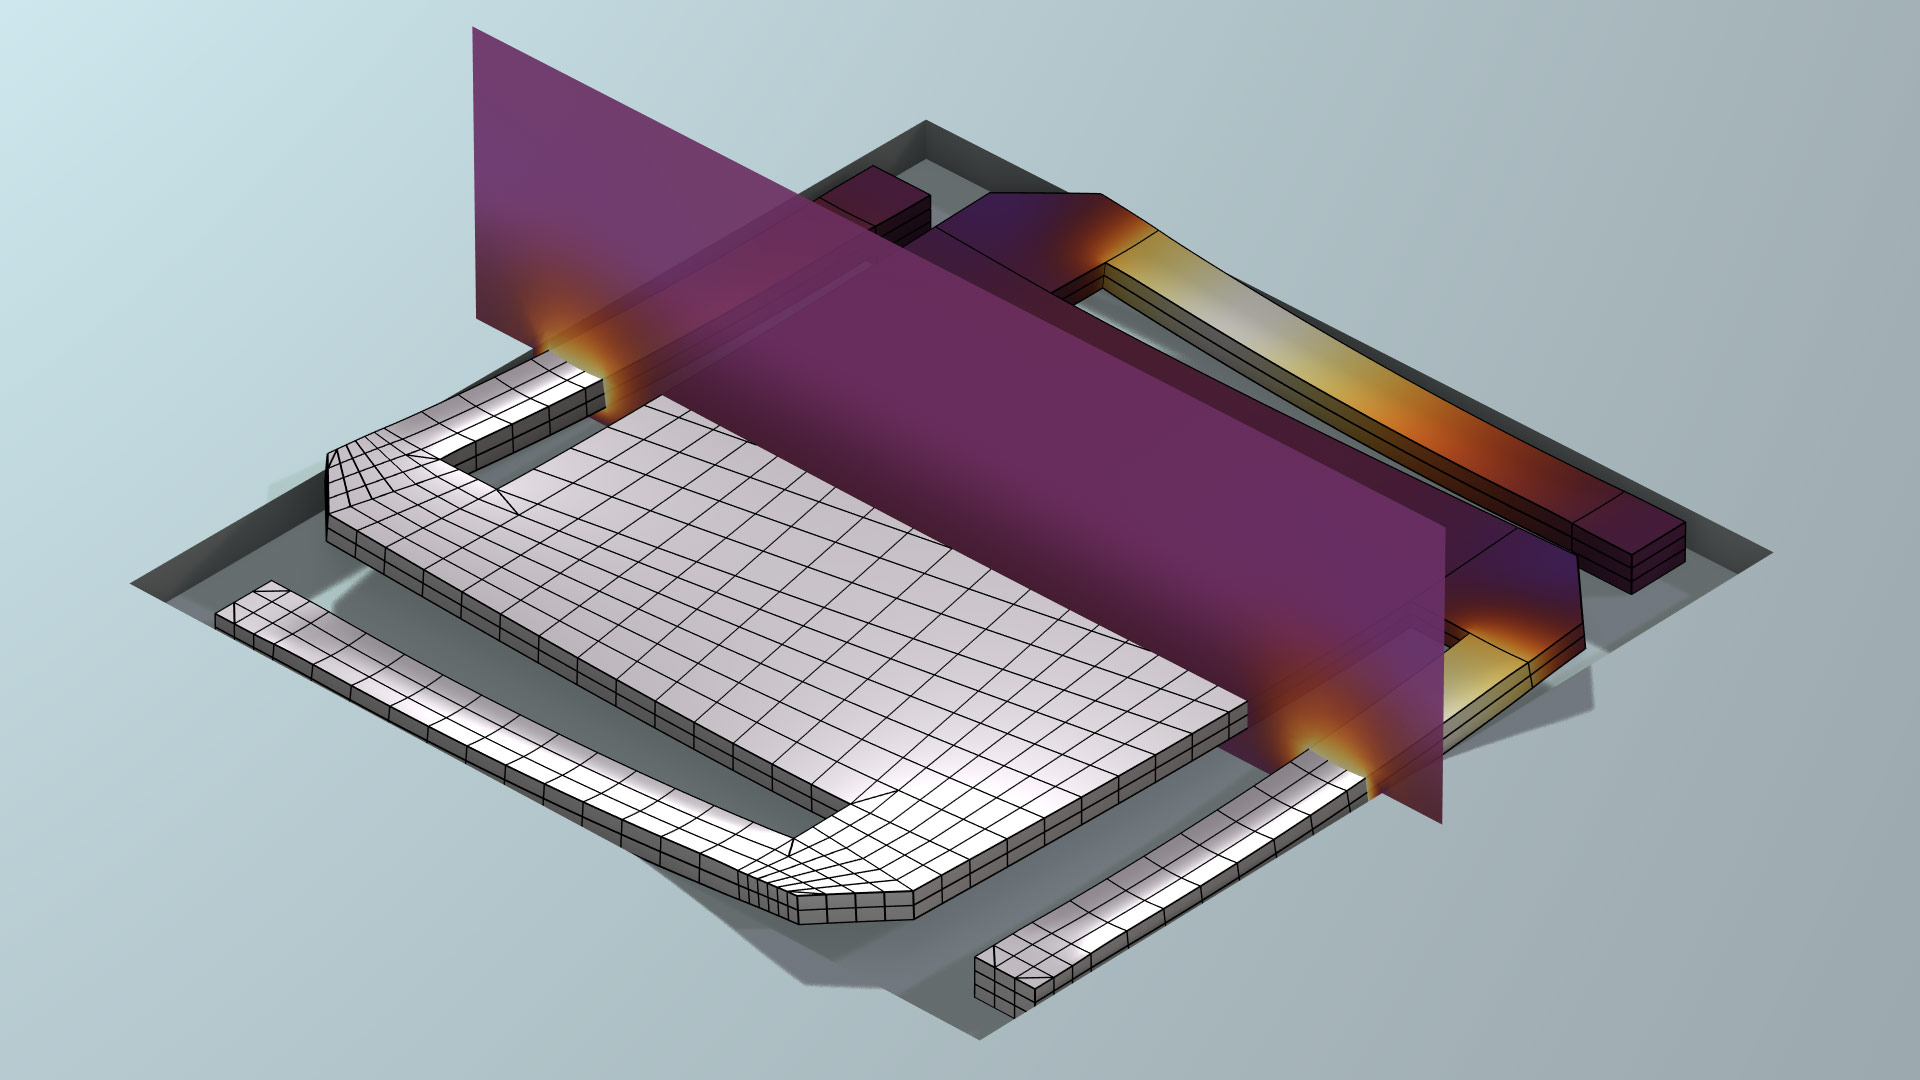 A micromirror model showing the temperature and mesh.